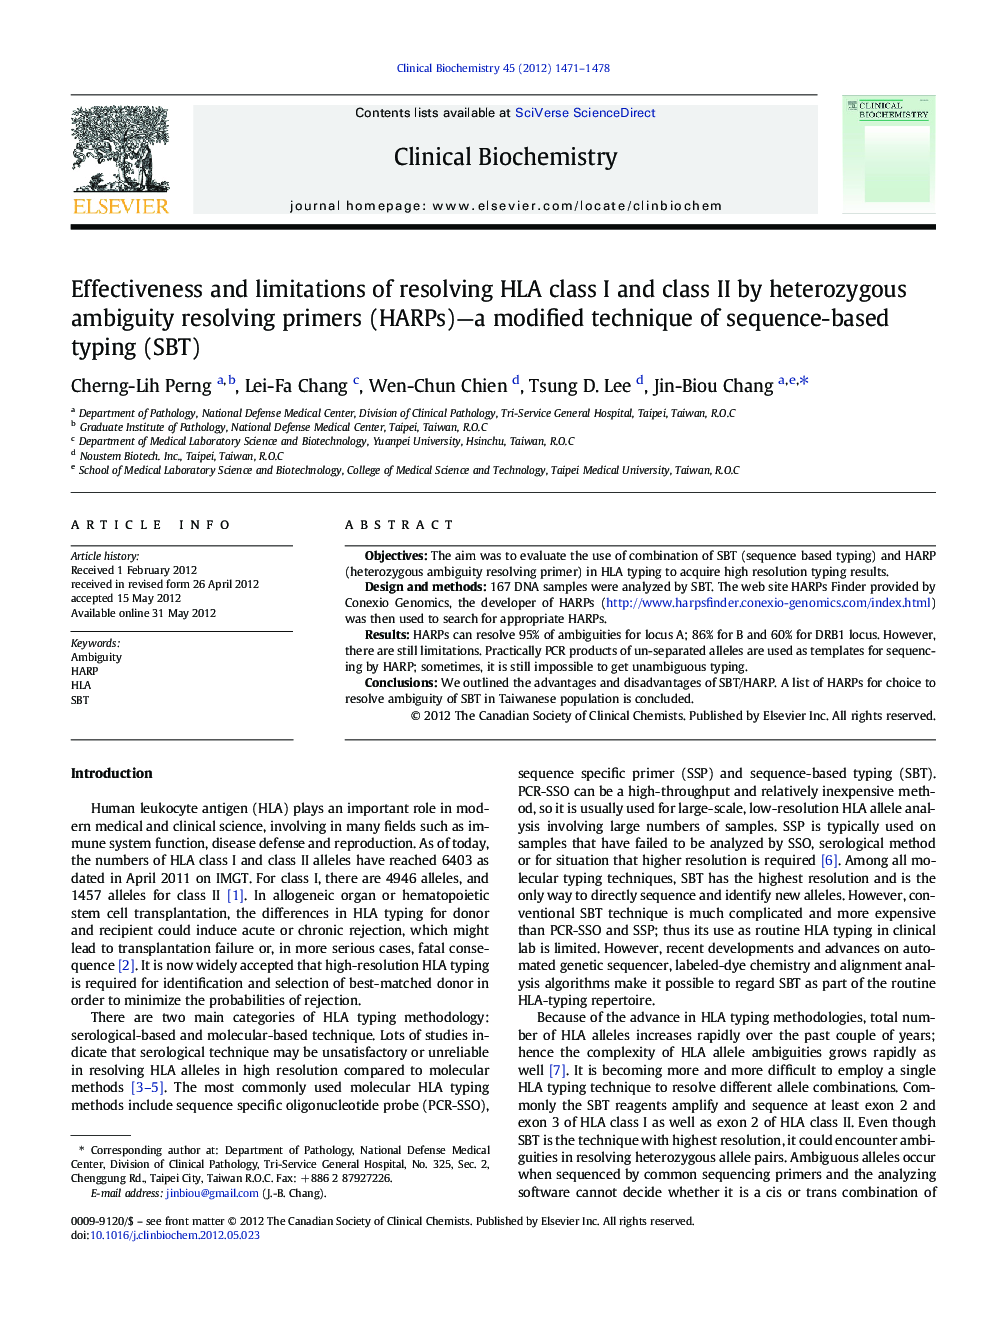 Effectiveness and limitations of resolving HLA class I and class II by heterozygous ambiguity resolving primers (HARPs)-a modified technique of sequence-based typing (SBT)